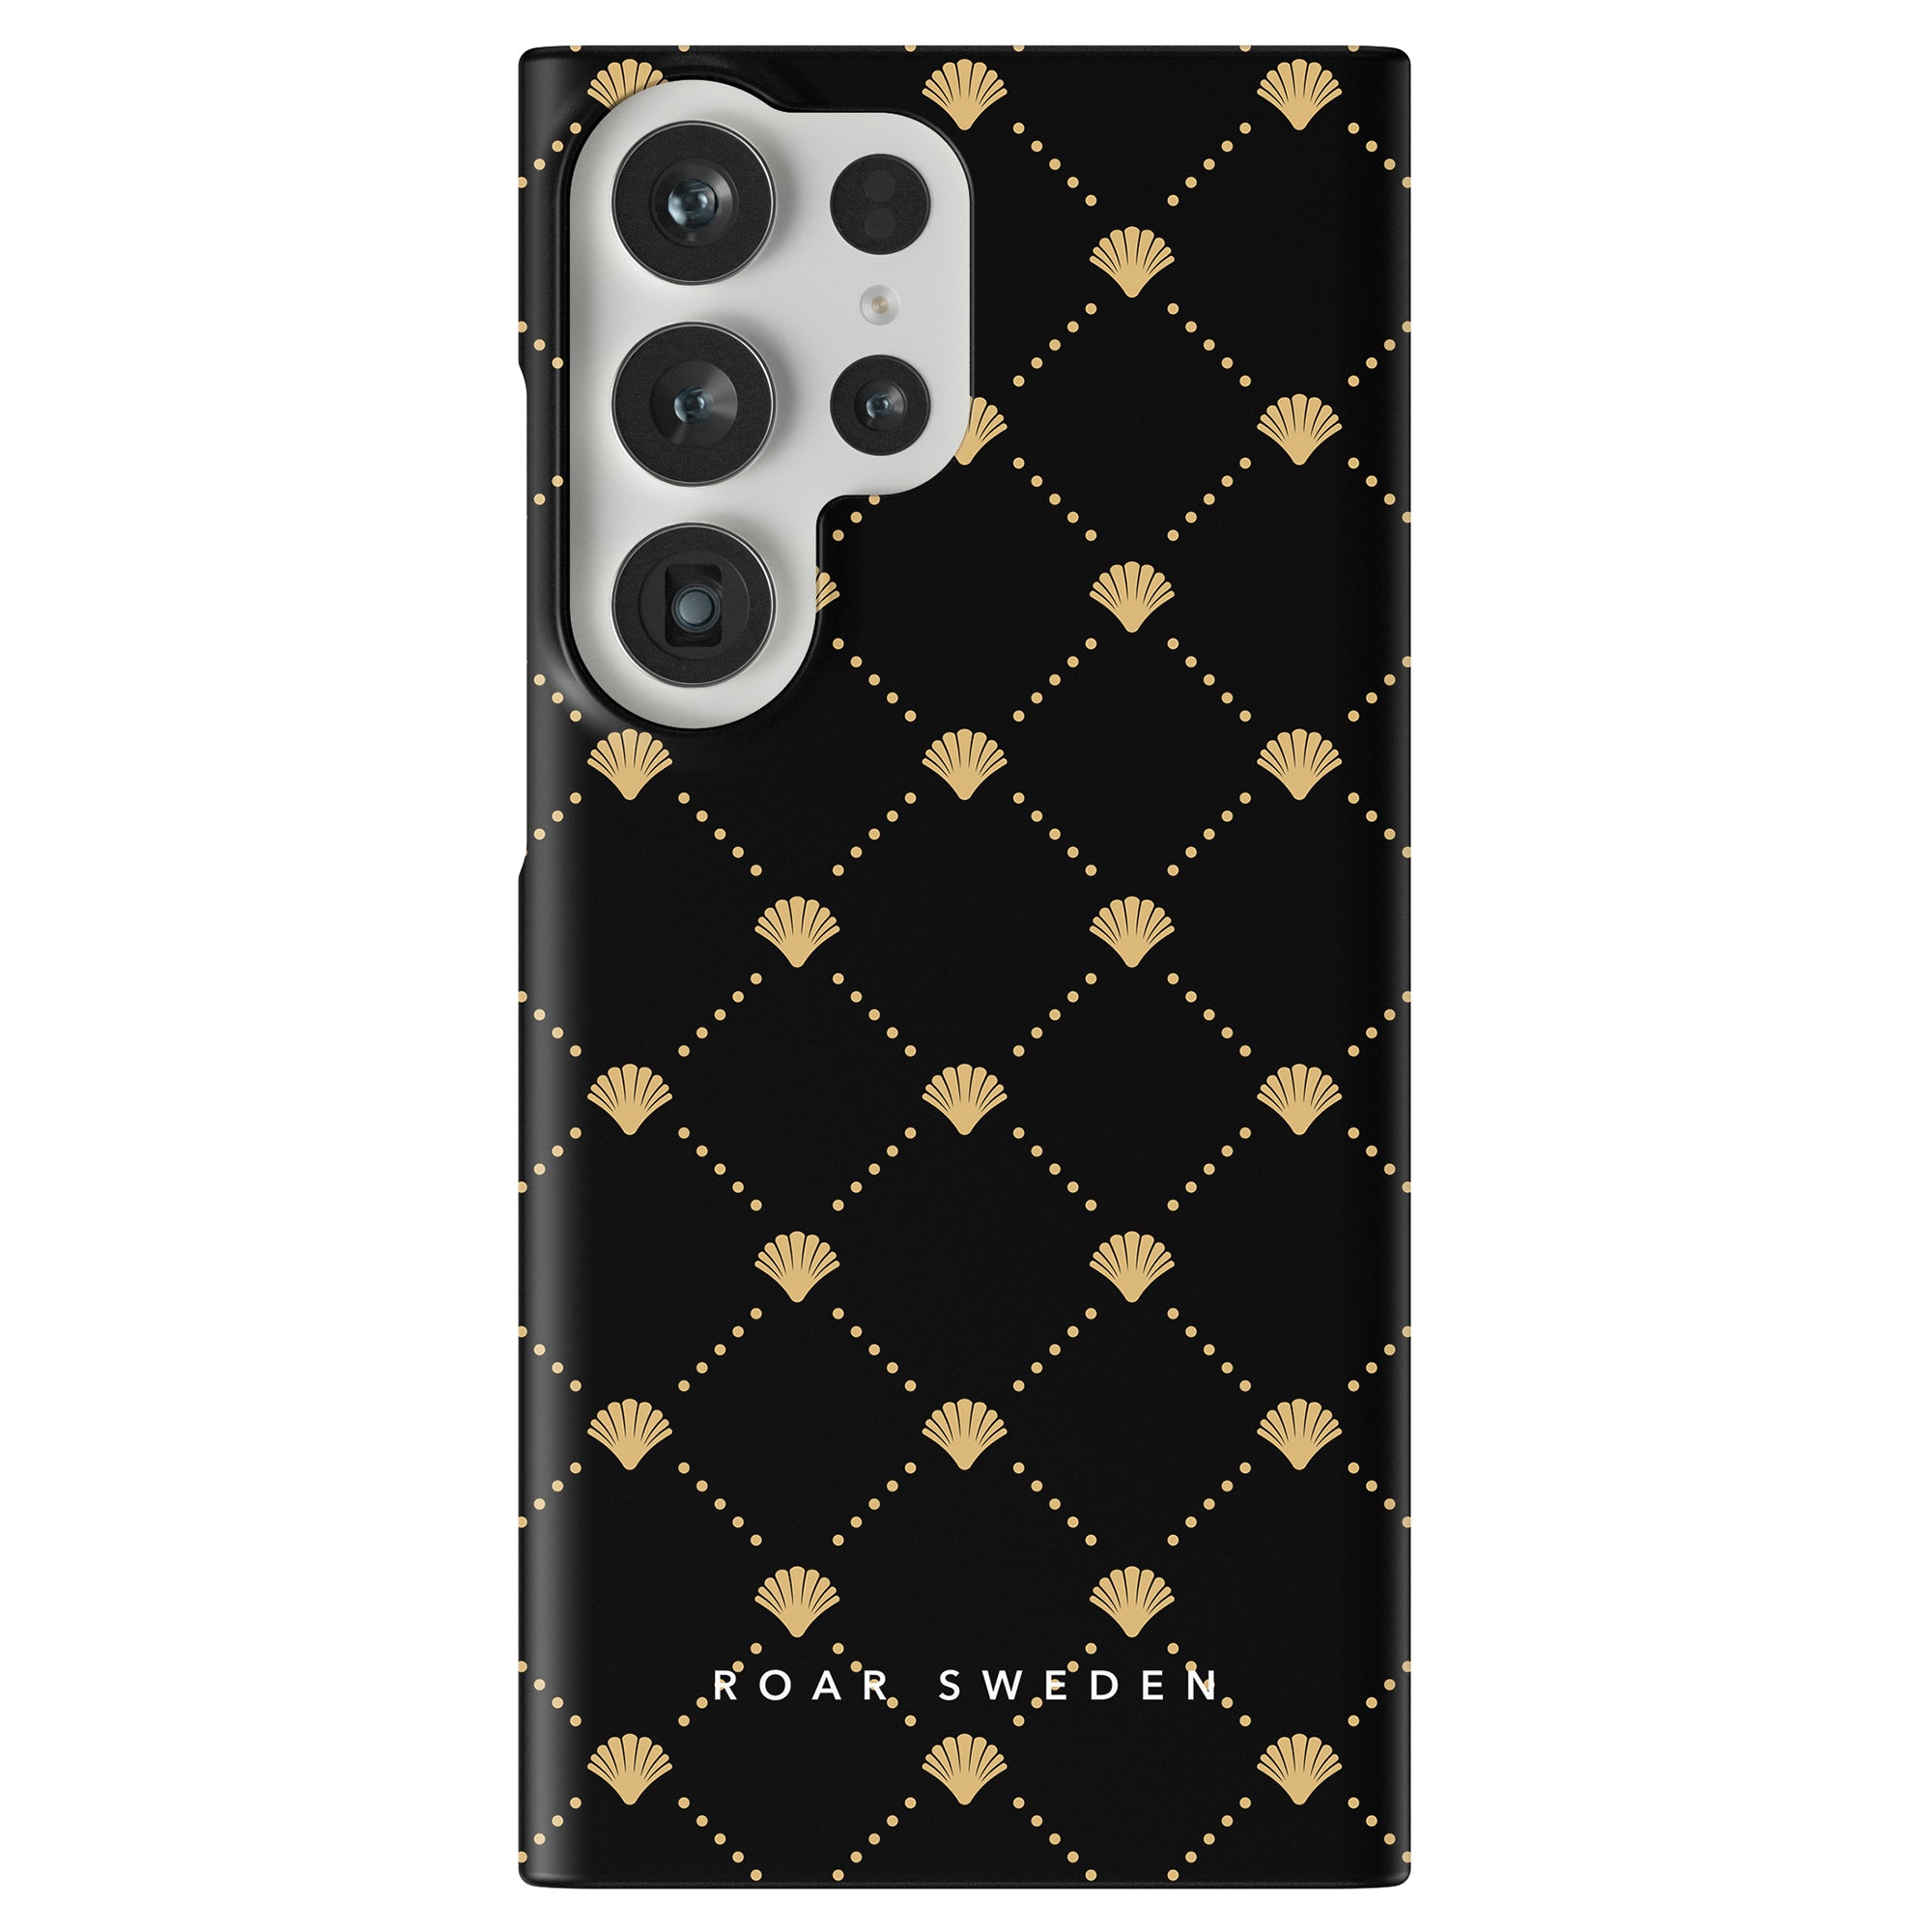 A black phone case from the Ocean Collection, adorned with a diamond pattern featuring small gold accents and the text "ROAR SWEDEN" at the bottom. The Luxe Shells Black - Slim case design adds an extra touch of elegance to your mobilskal.